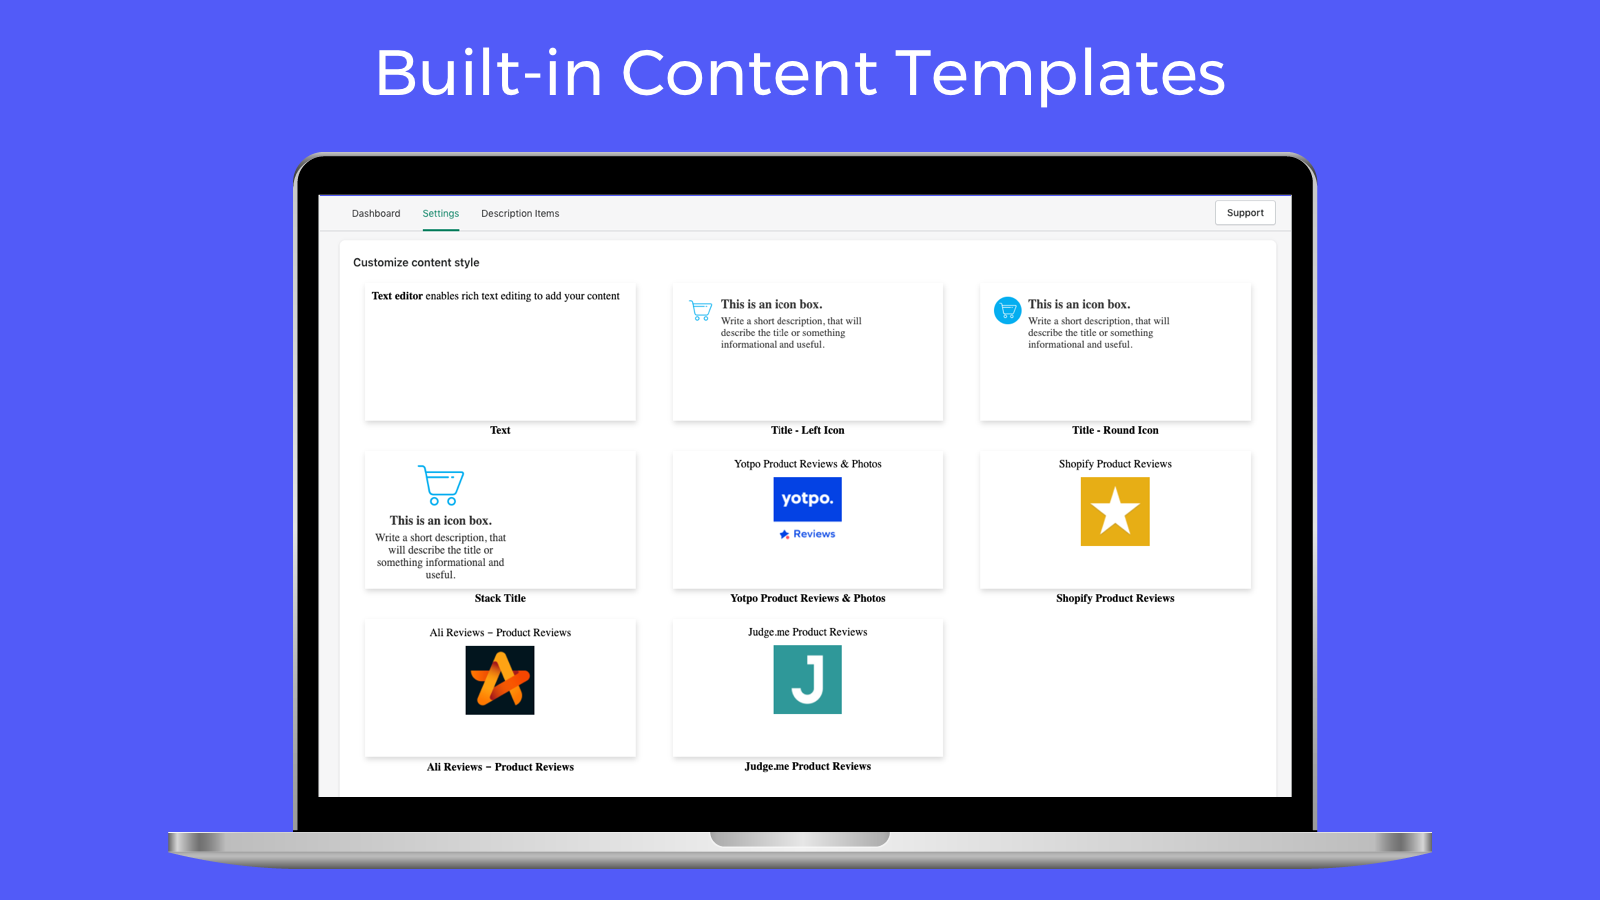 Built-in Content Templates